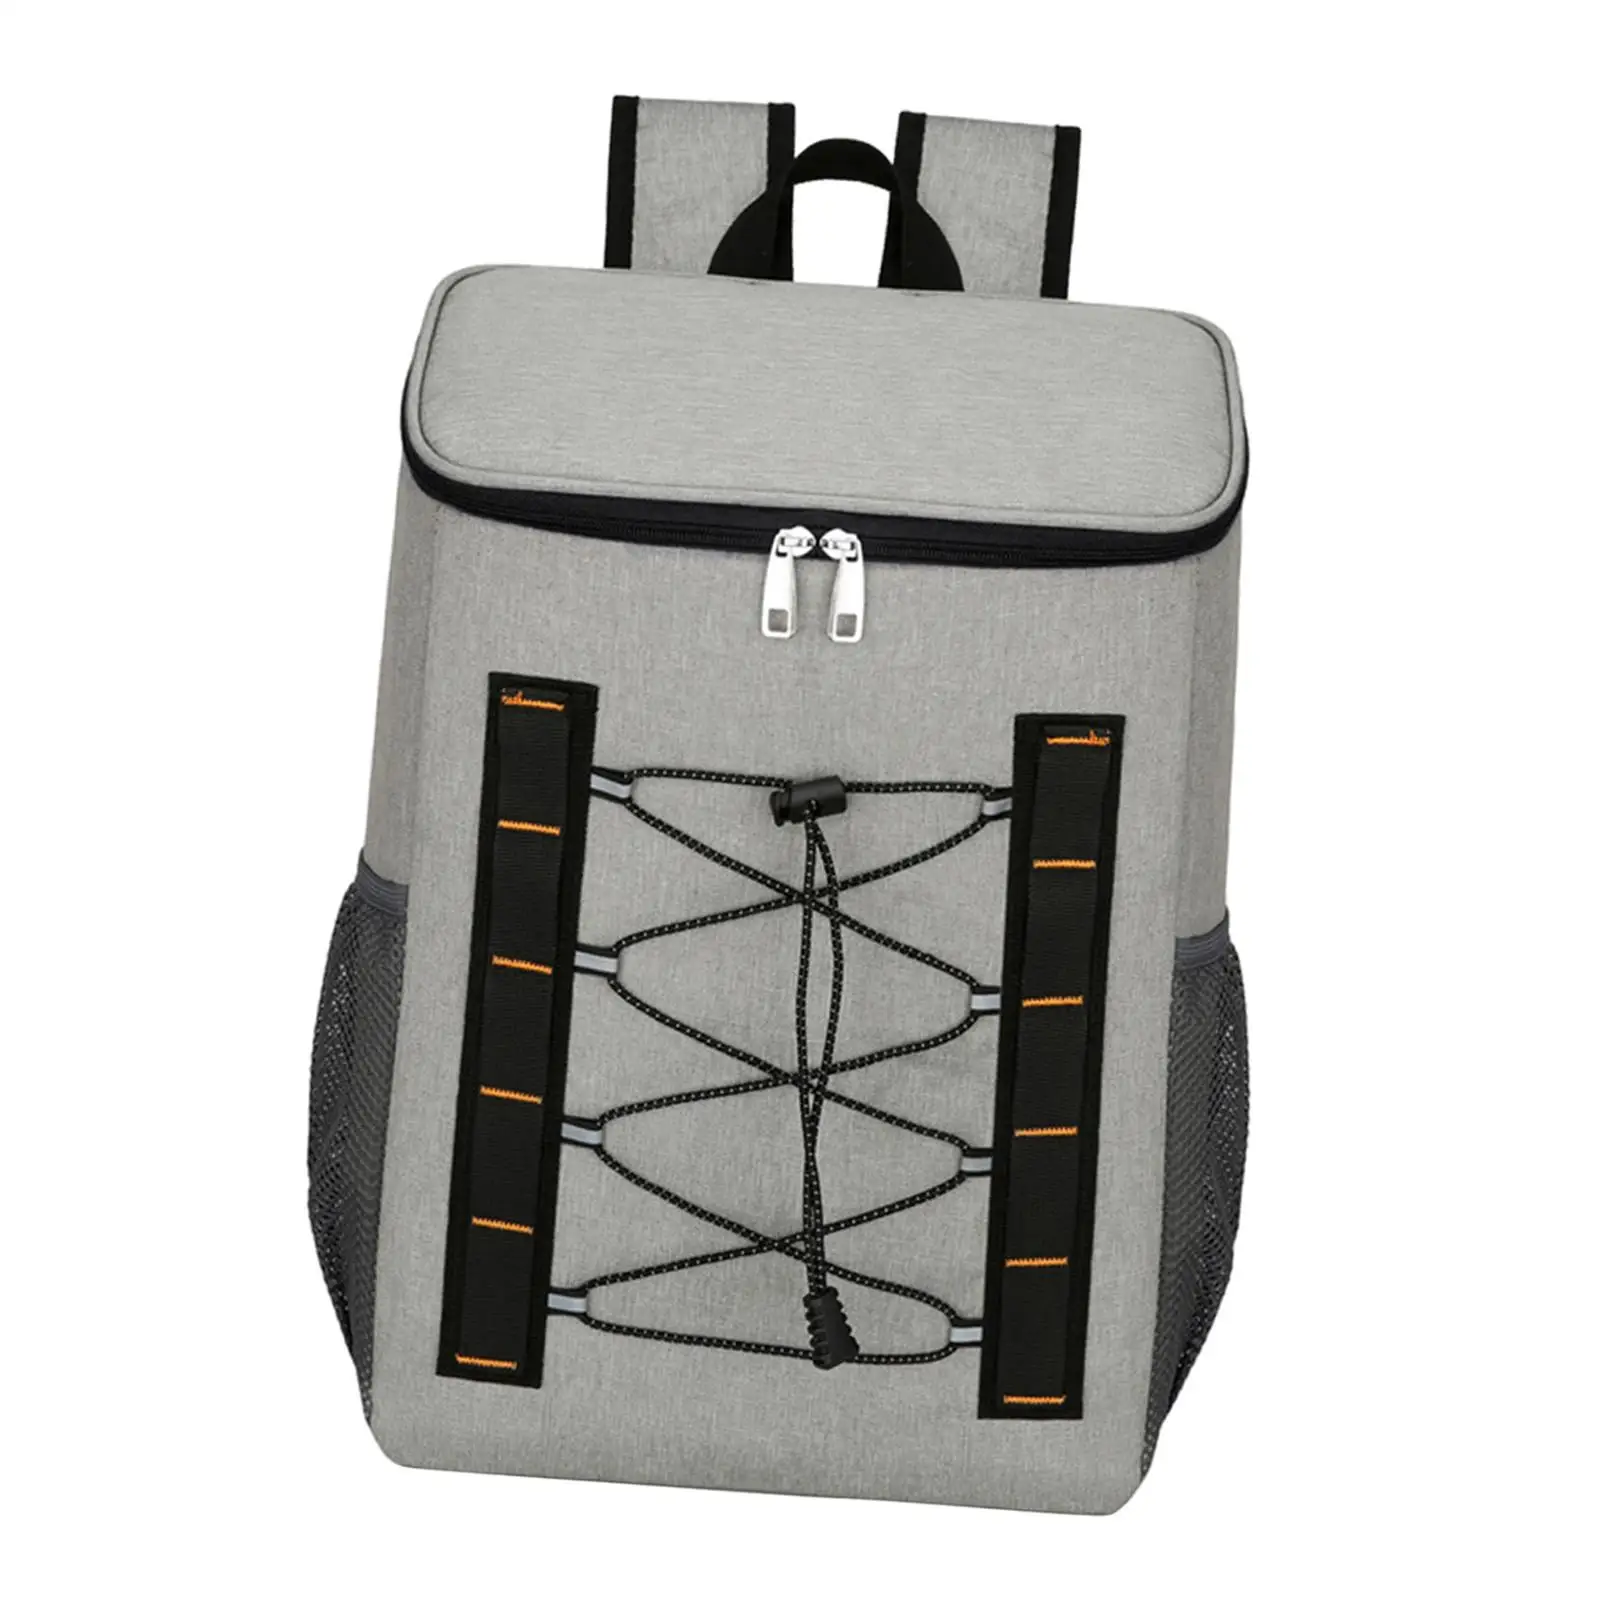 Outdoor Picnic Bag Mesh Pocket Waterproof Insulated Lunch Backpack for Trips